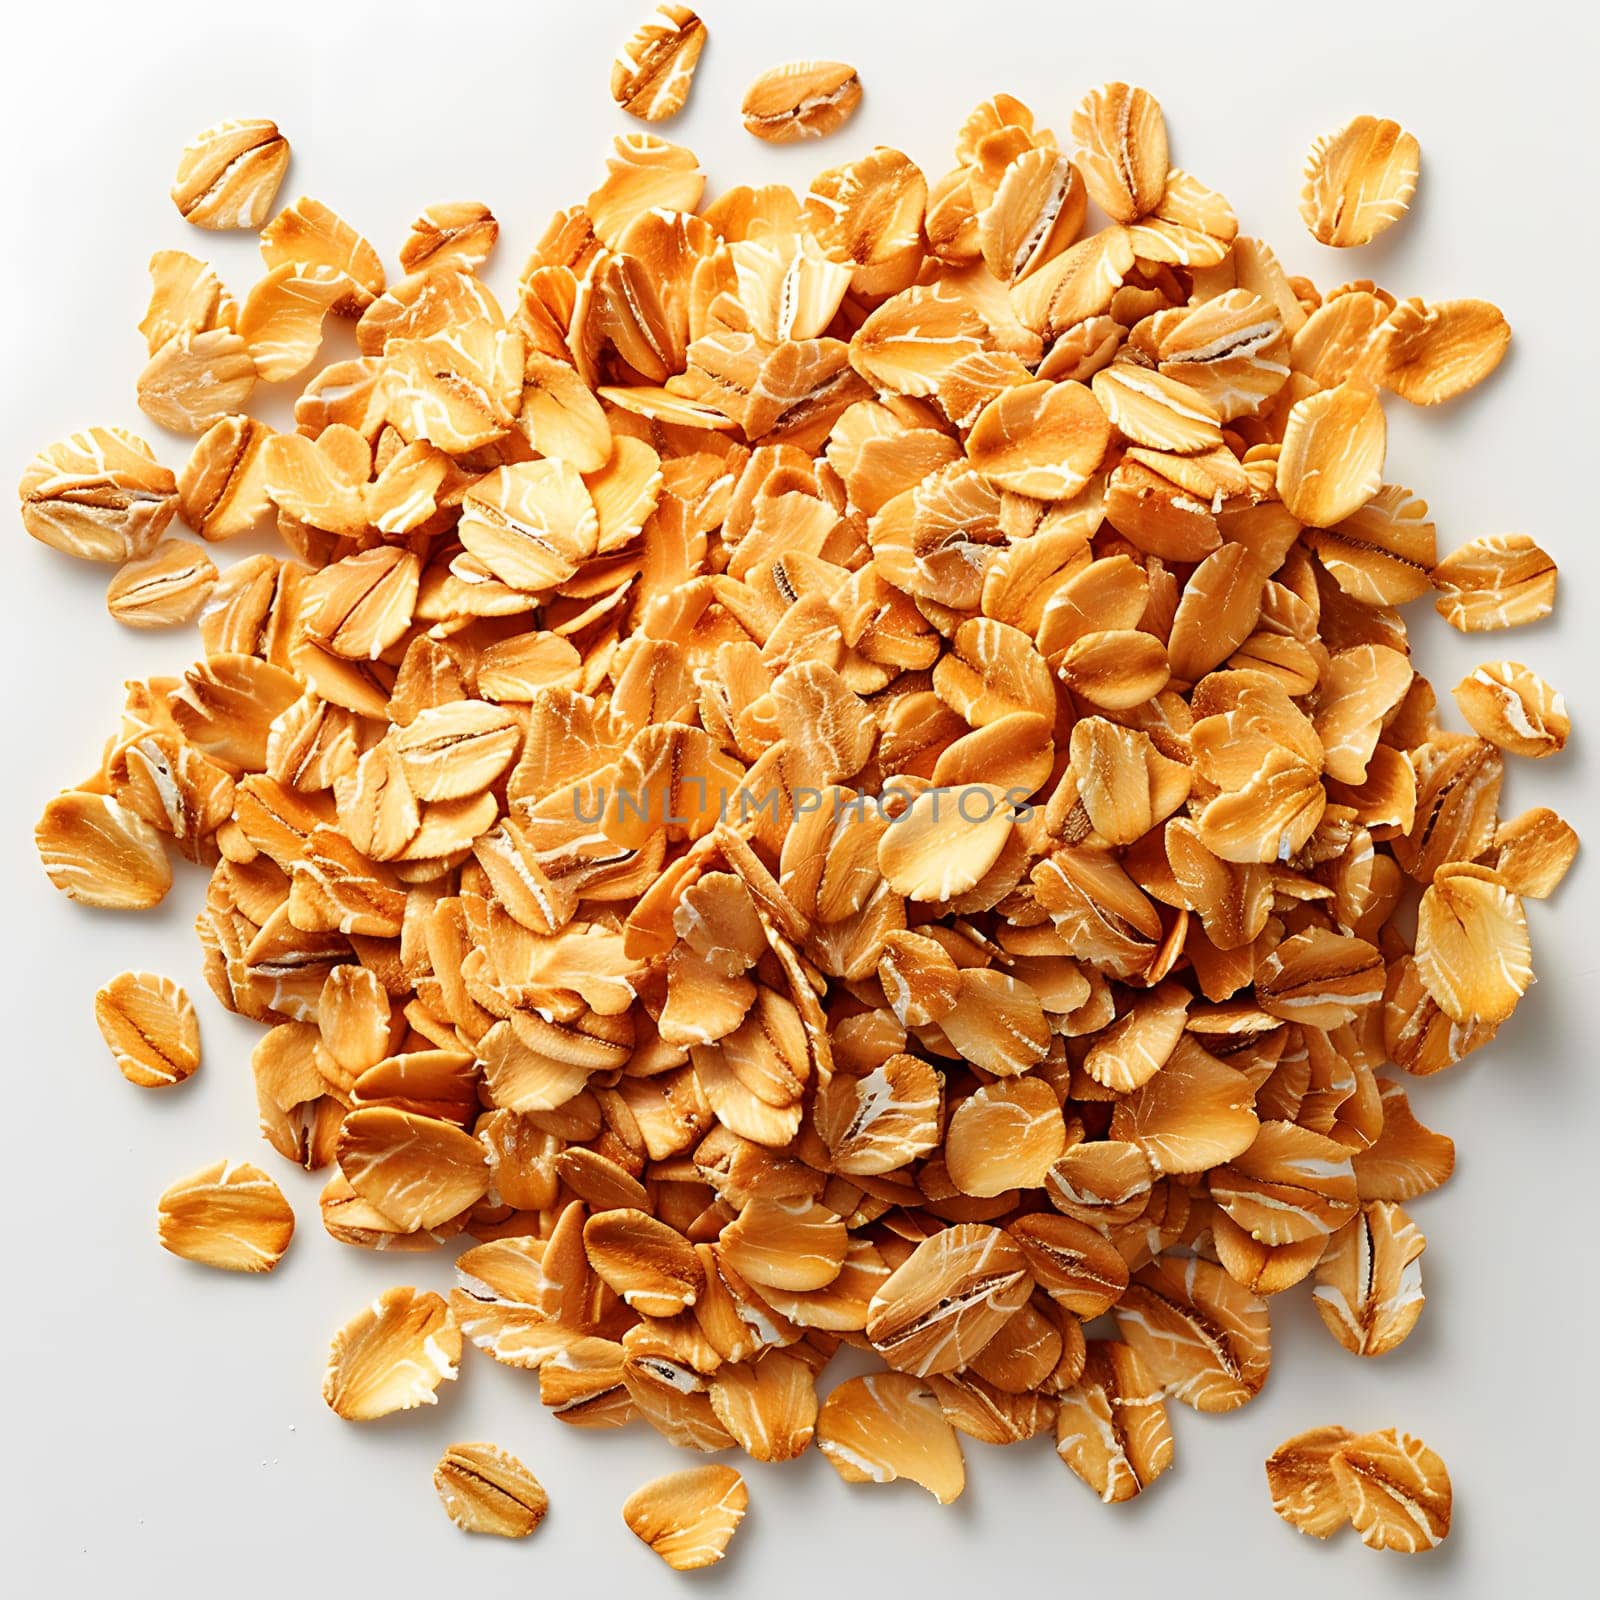 Rolled oats, a staple food ingredient, are a type of seed from the oat plant. They are commonly used in cuisine to produce breakfast cereal dishes. A pile of oats rests on a white surface